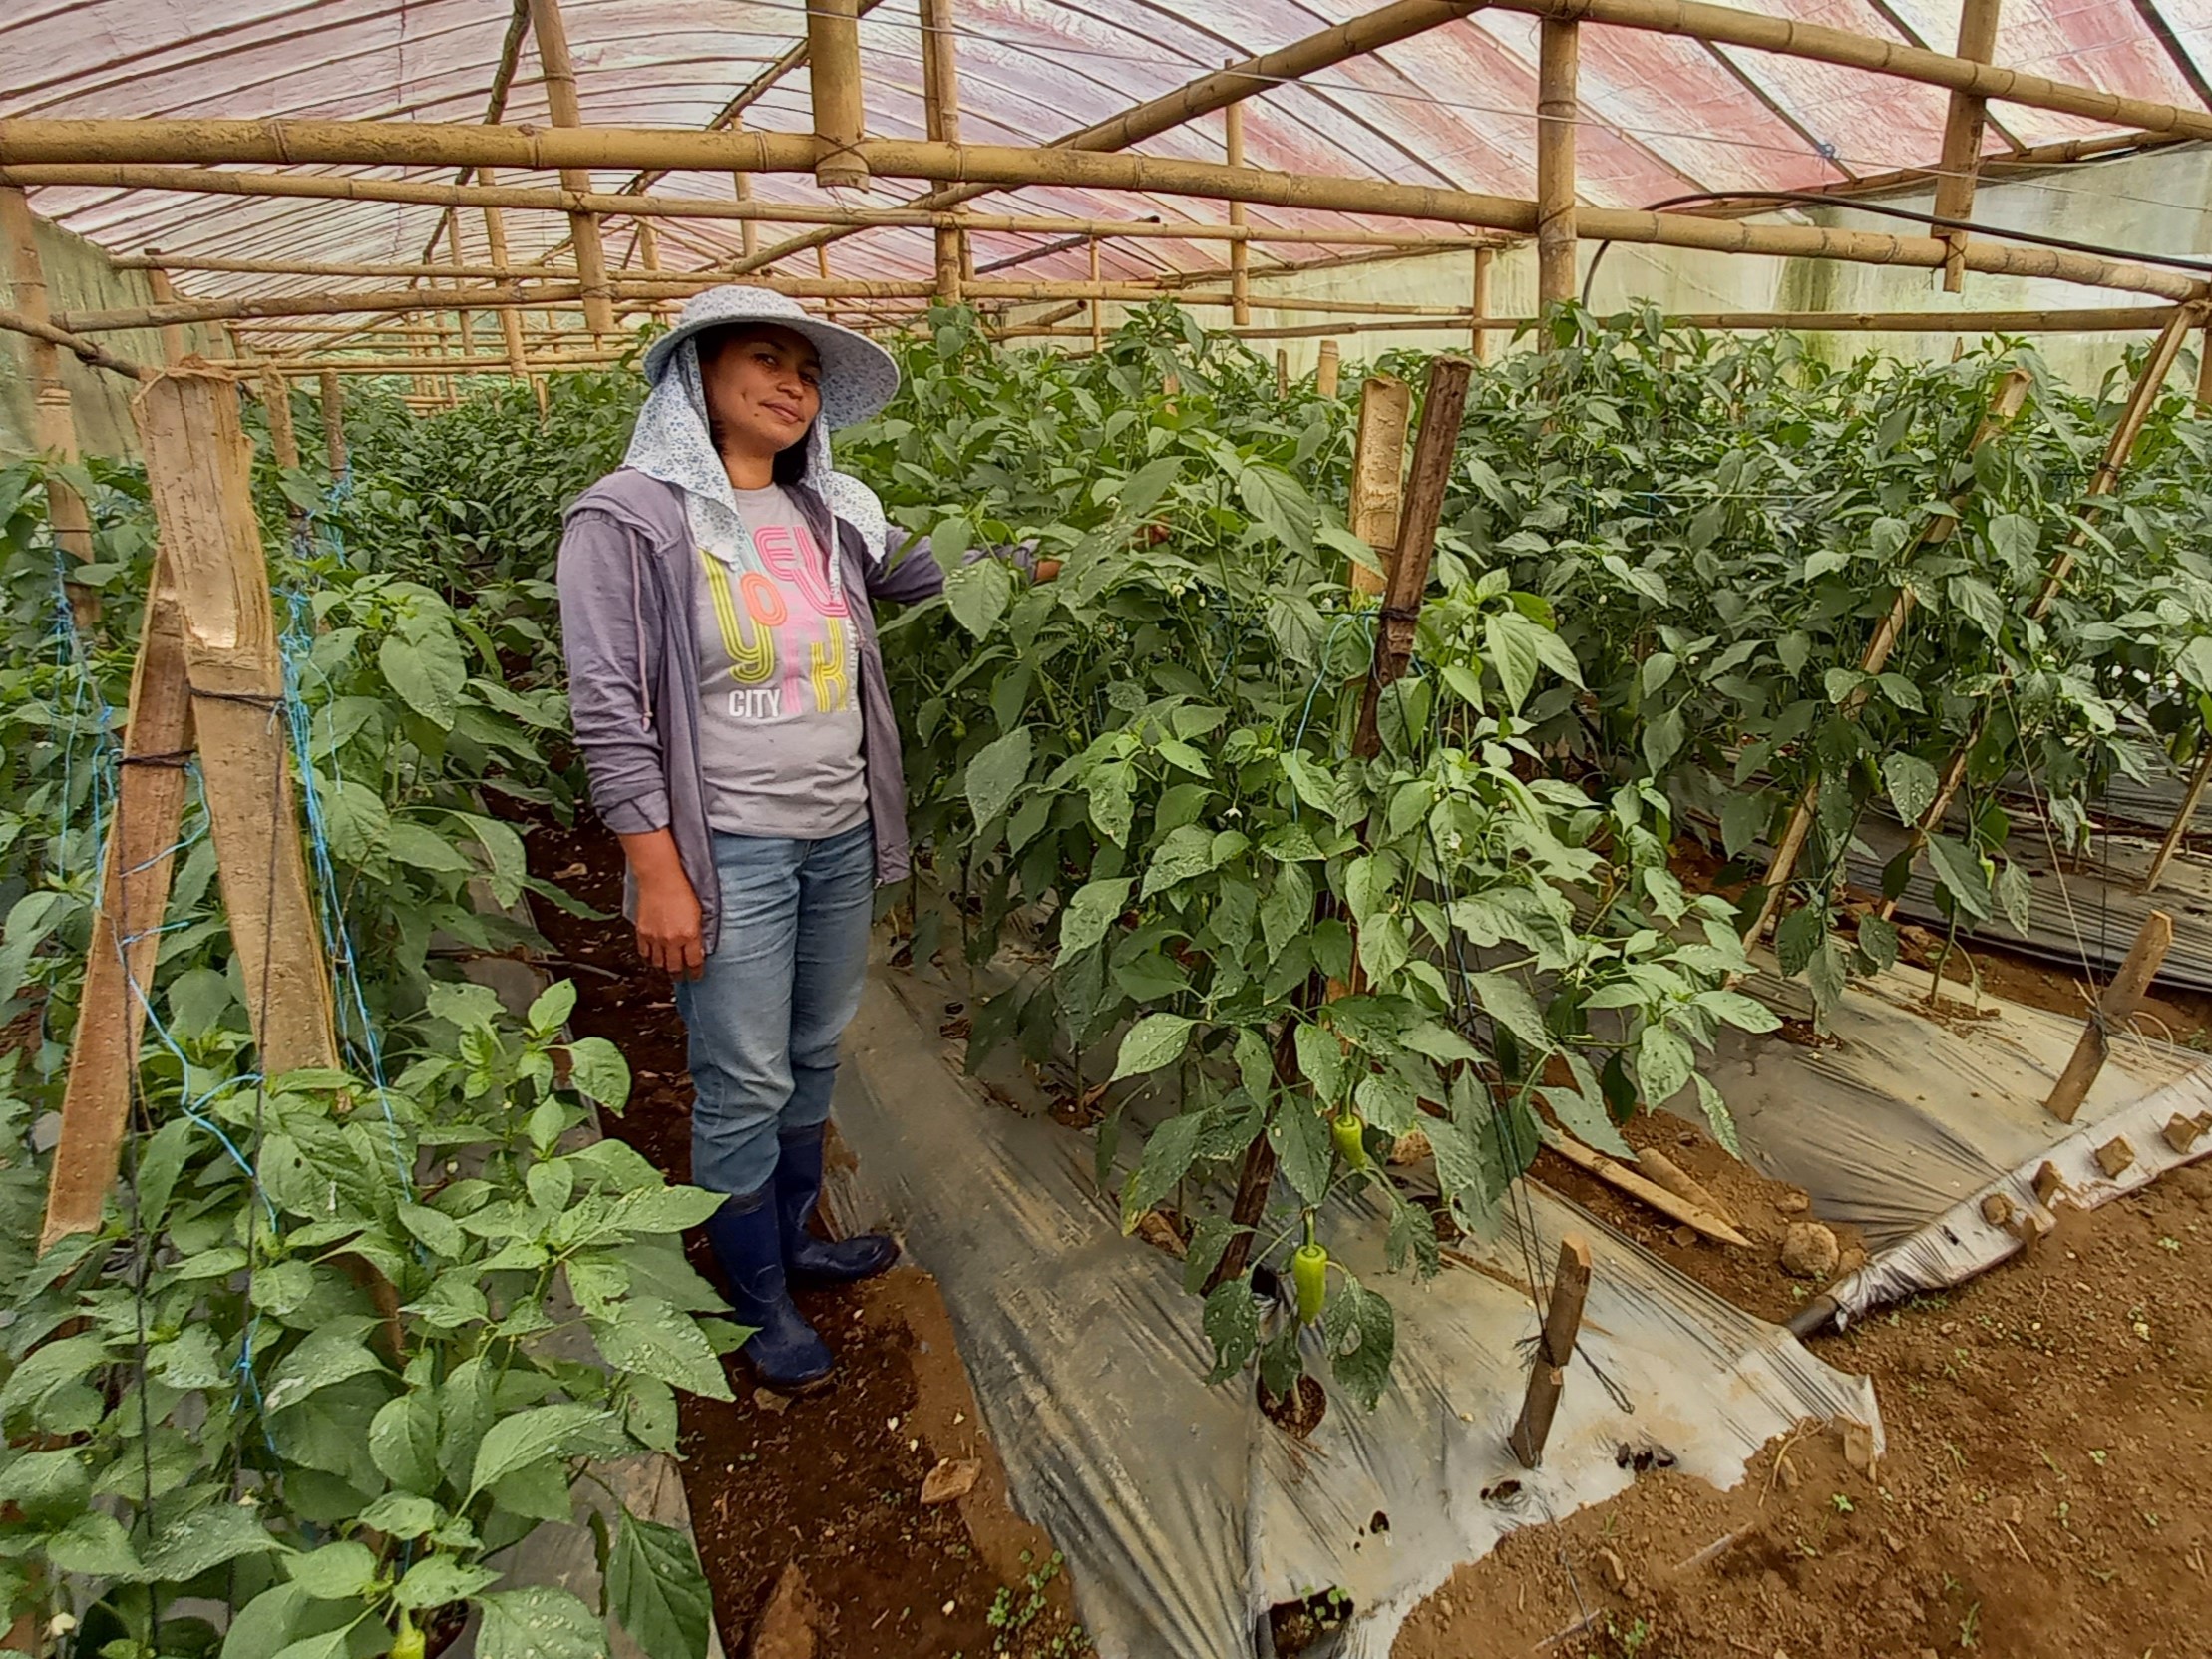 A woman farmer stands in her wood-framed greenhouse amid tall pepper plants.